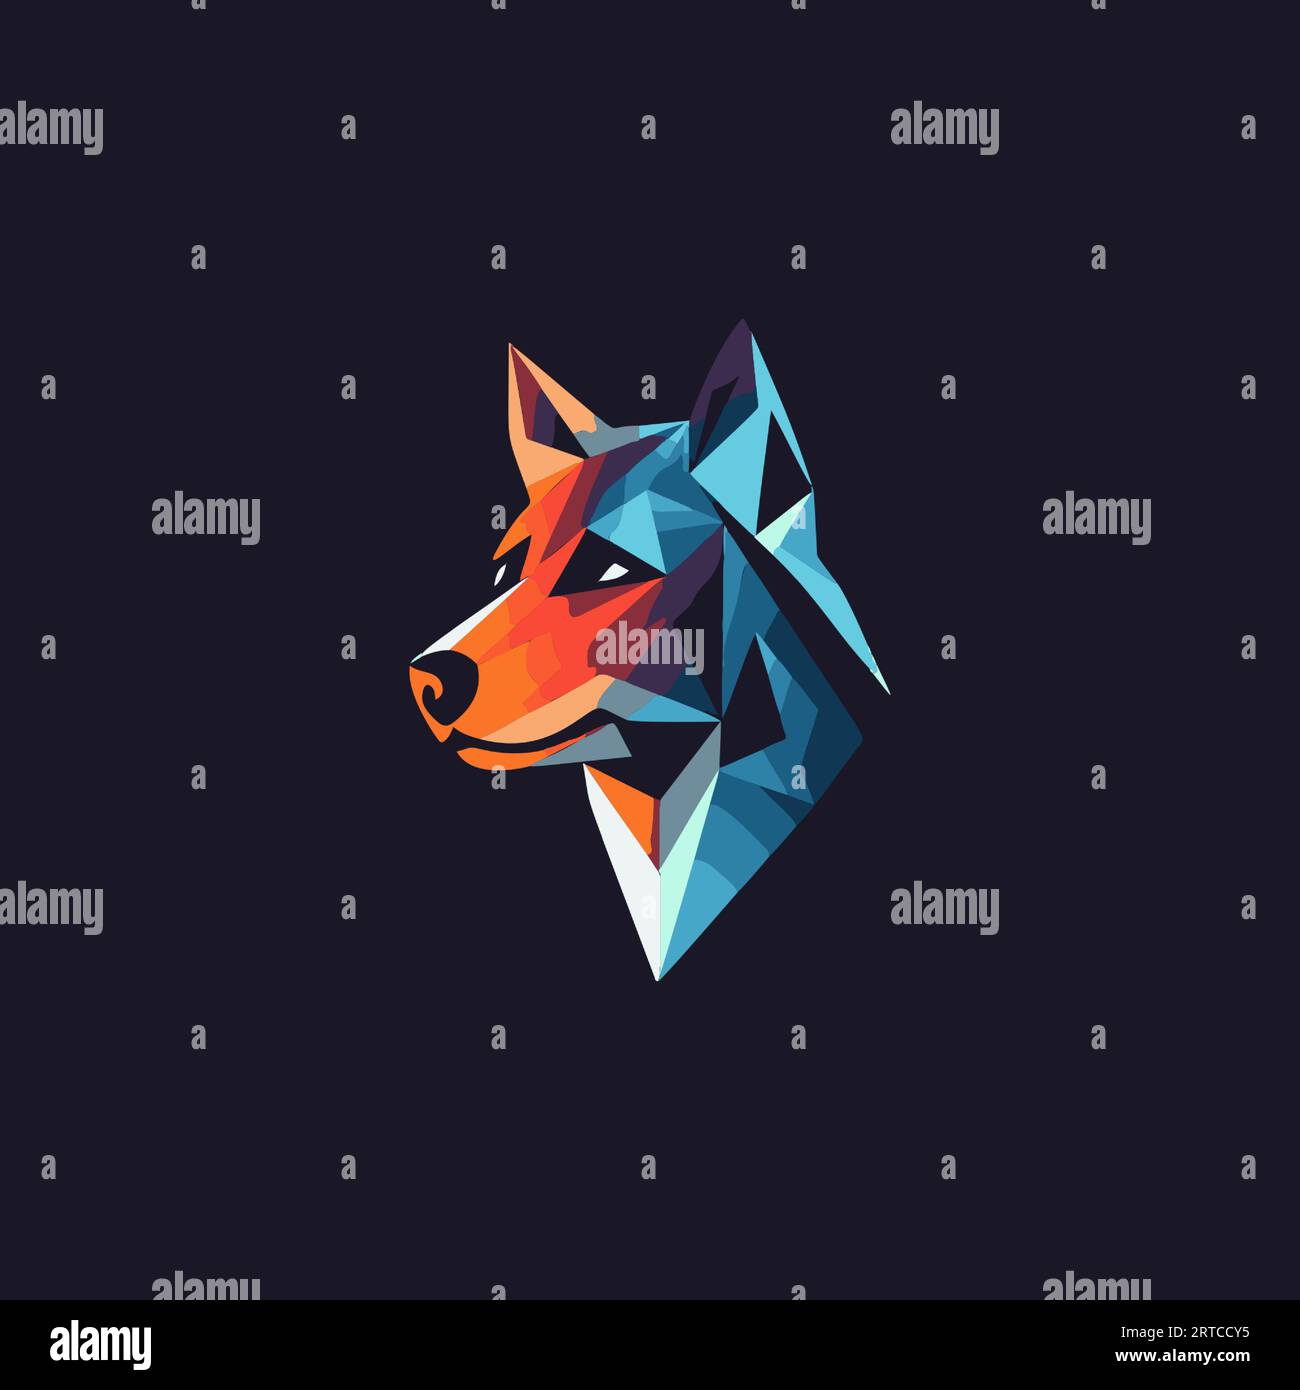 colorful polygonal dog head mascot logo abstract geometric animal portrait in modern futuristic style with luminous colors versatile brand symbol 2RTCCY5